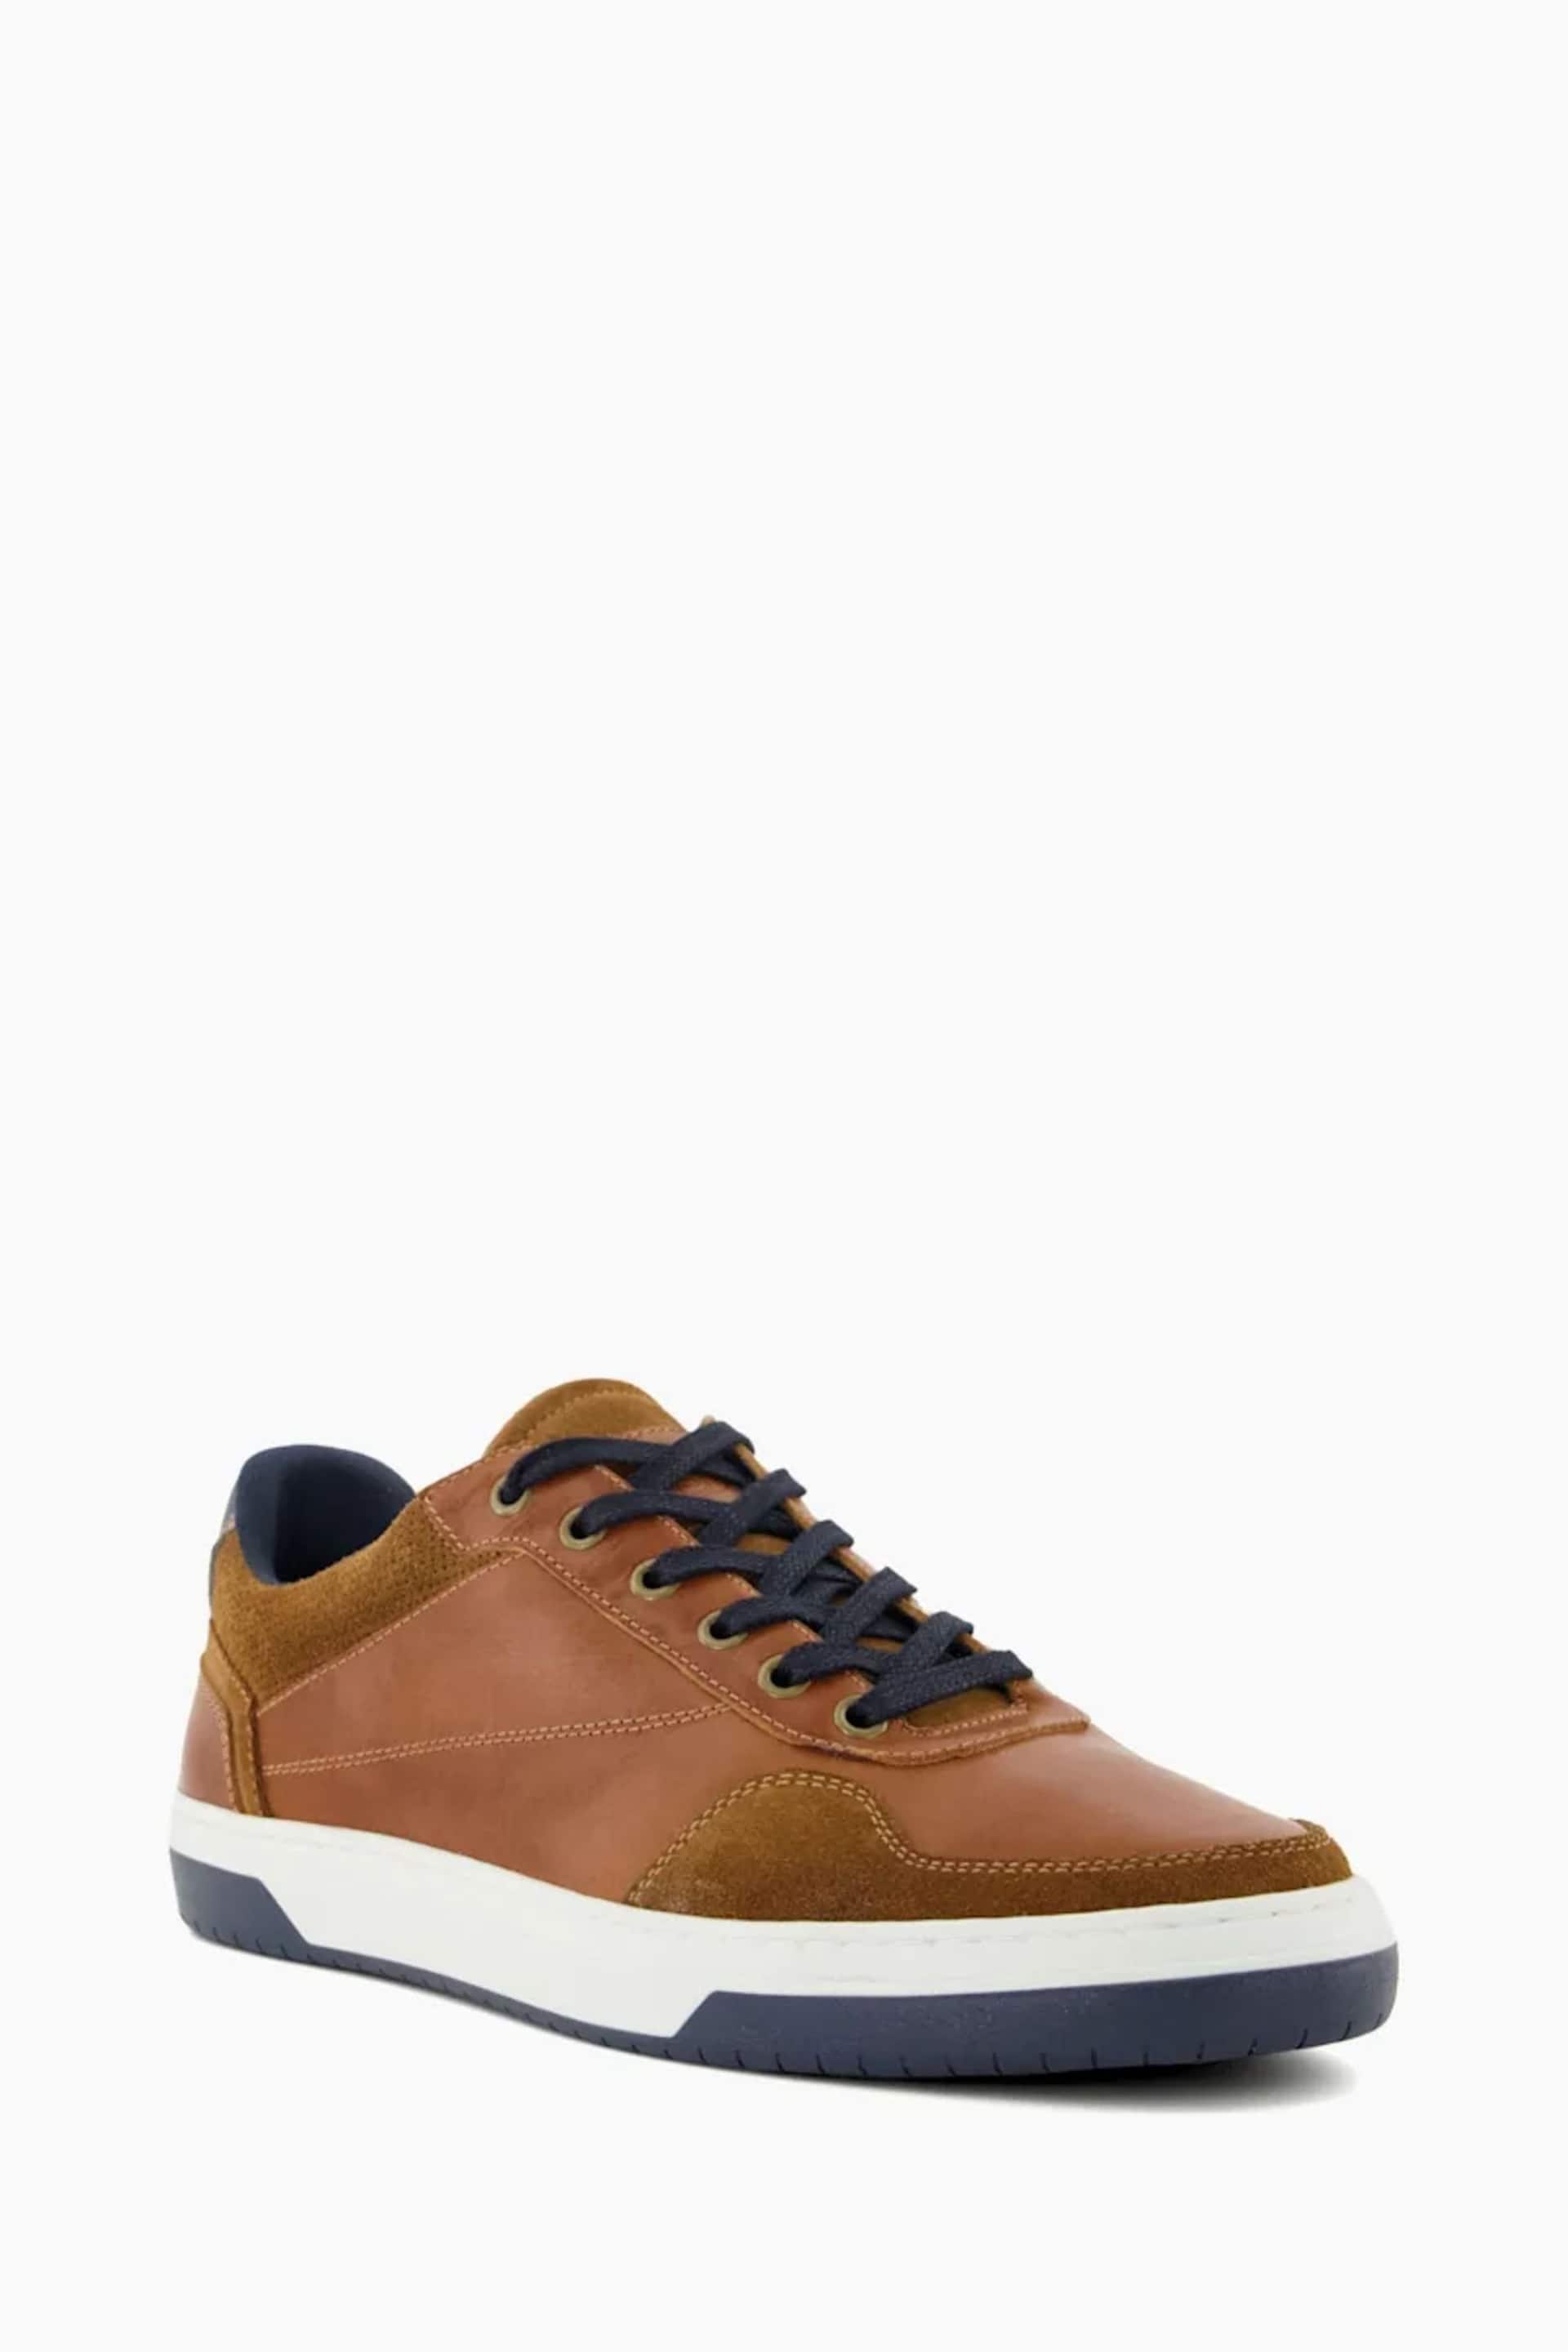 Dune London Brown Thorin Court Sneakers - Image 3 of 5